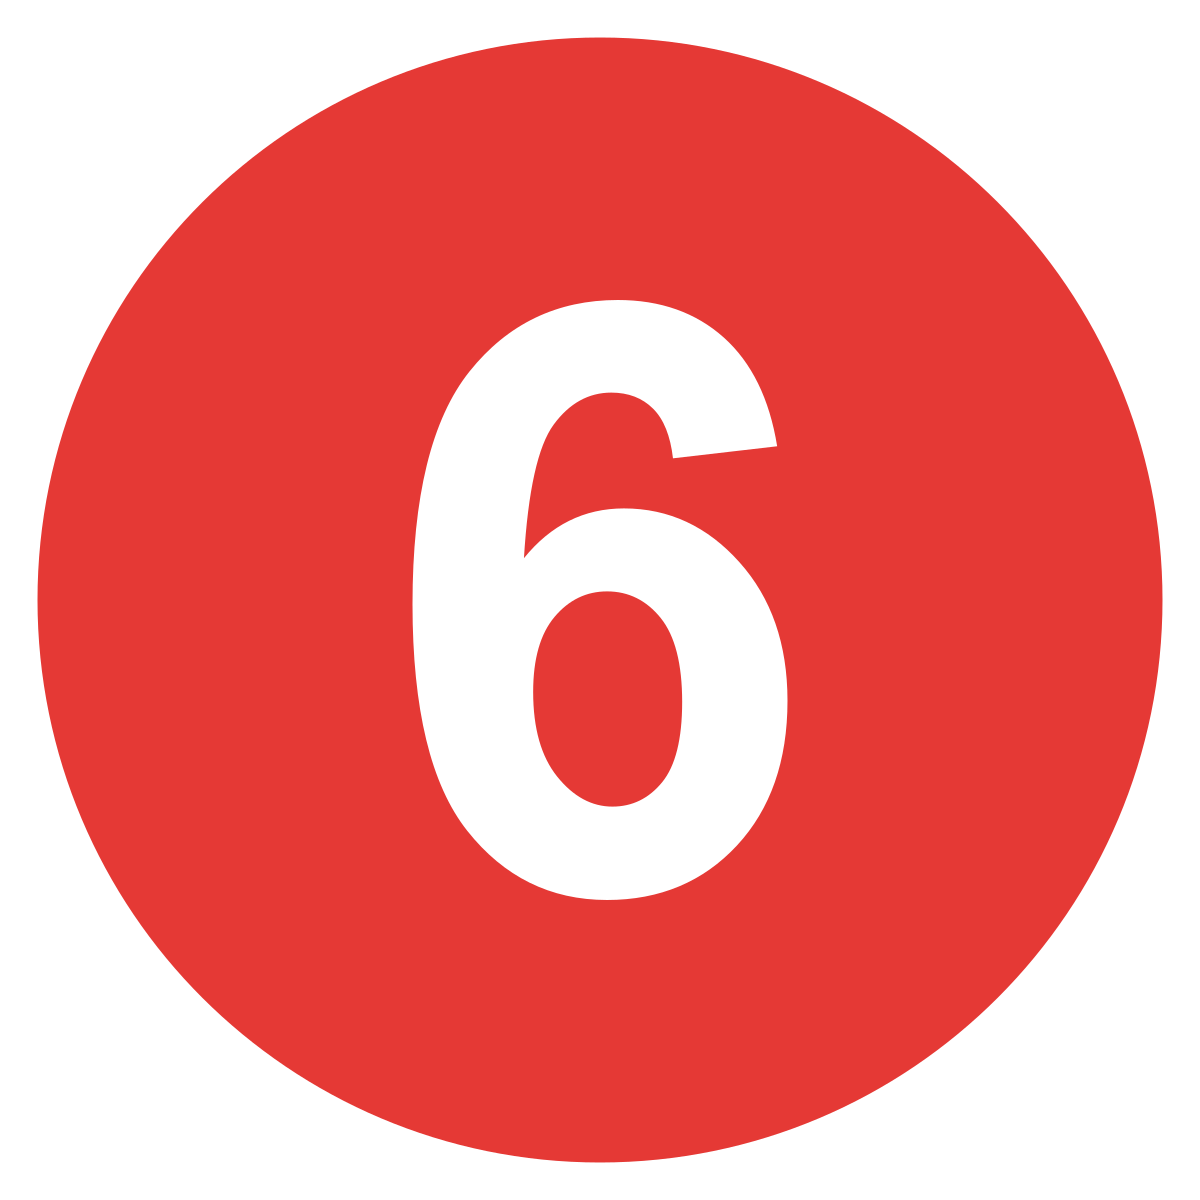 File:Eo circle red number-6.svg - Wikimedia Commons